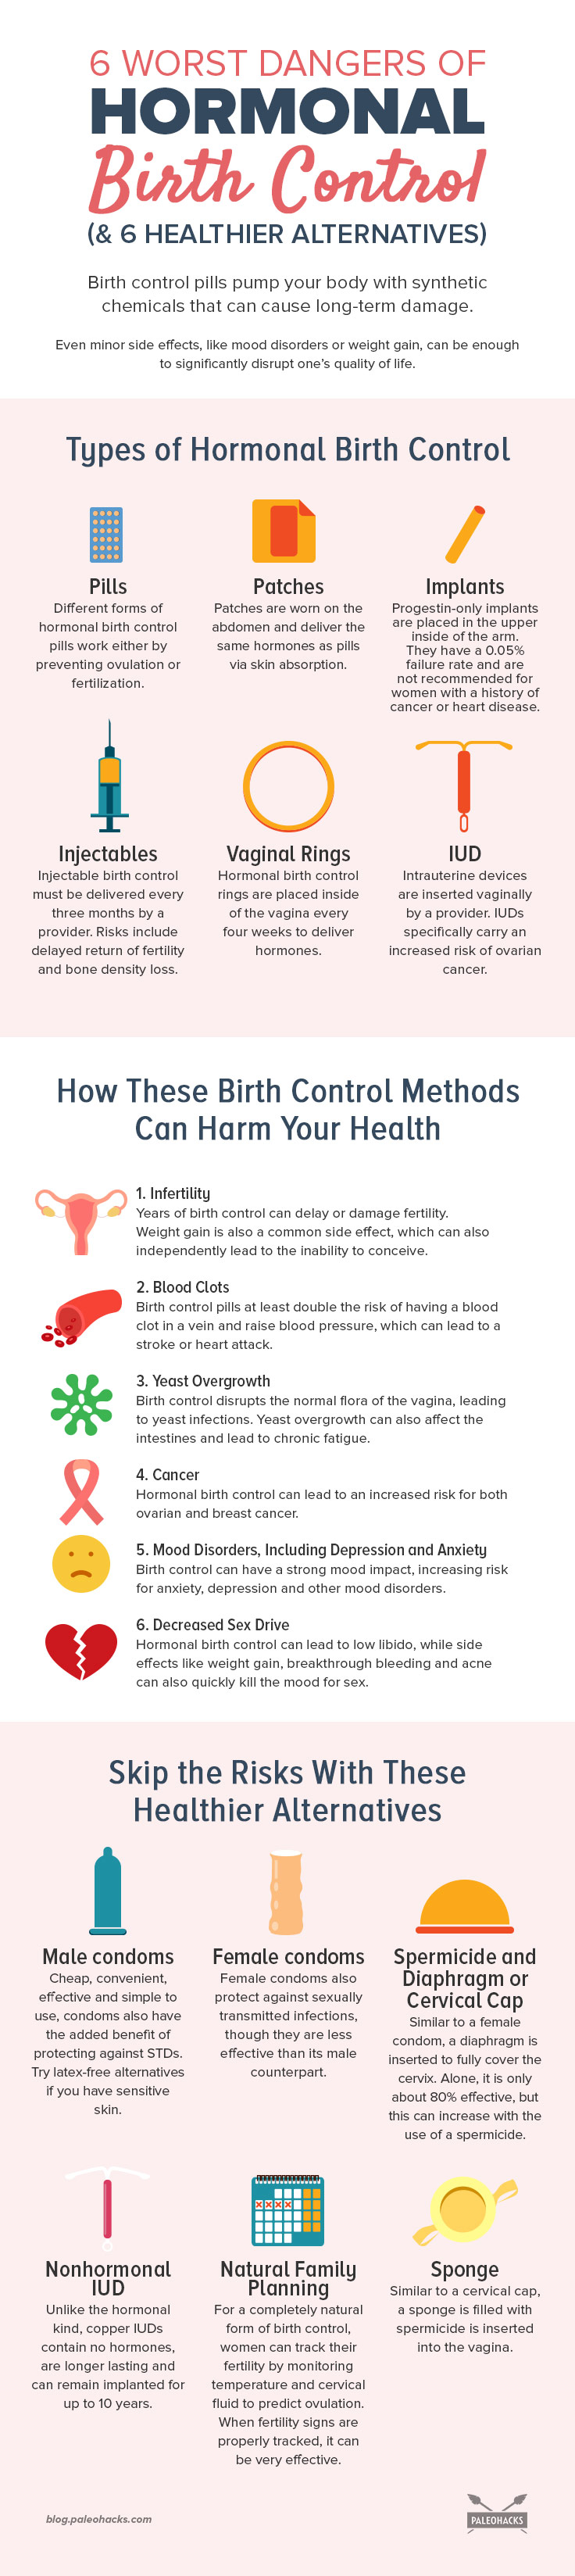 If you’re using birth control or considering it, make sure you know the dangers behind these little pills. Hormonal birth control could lead to infertility.